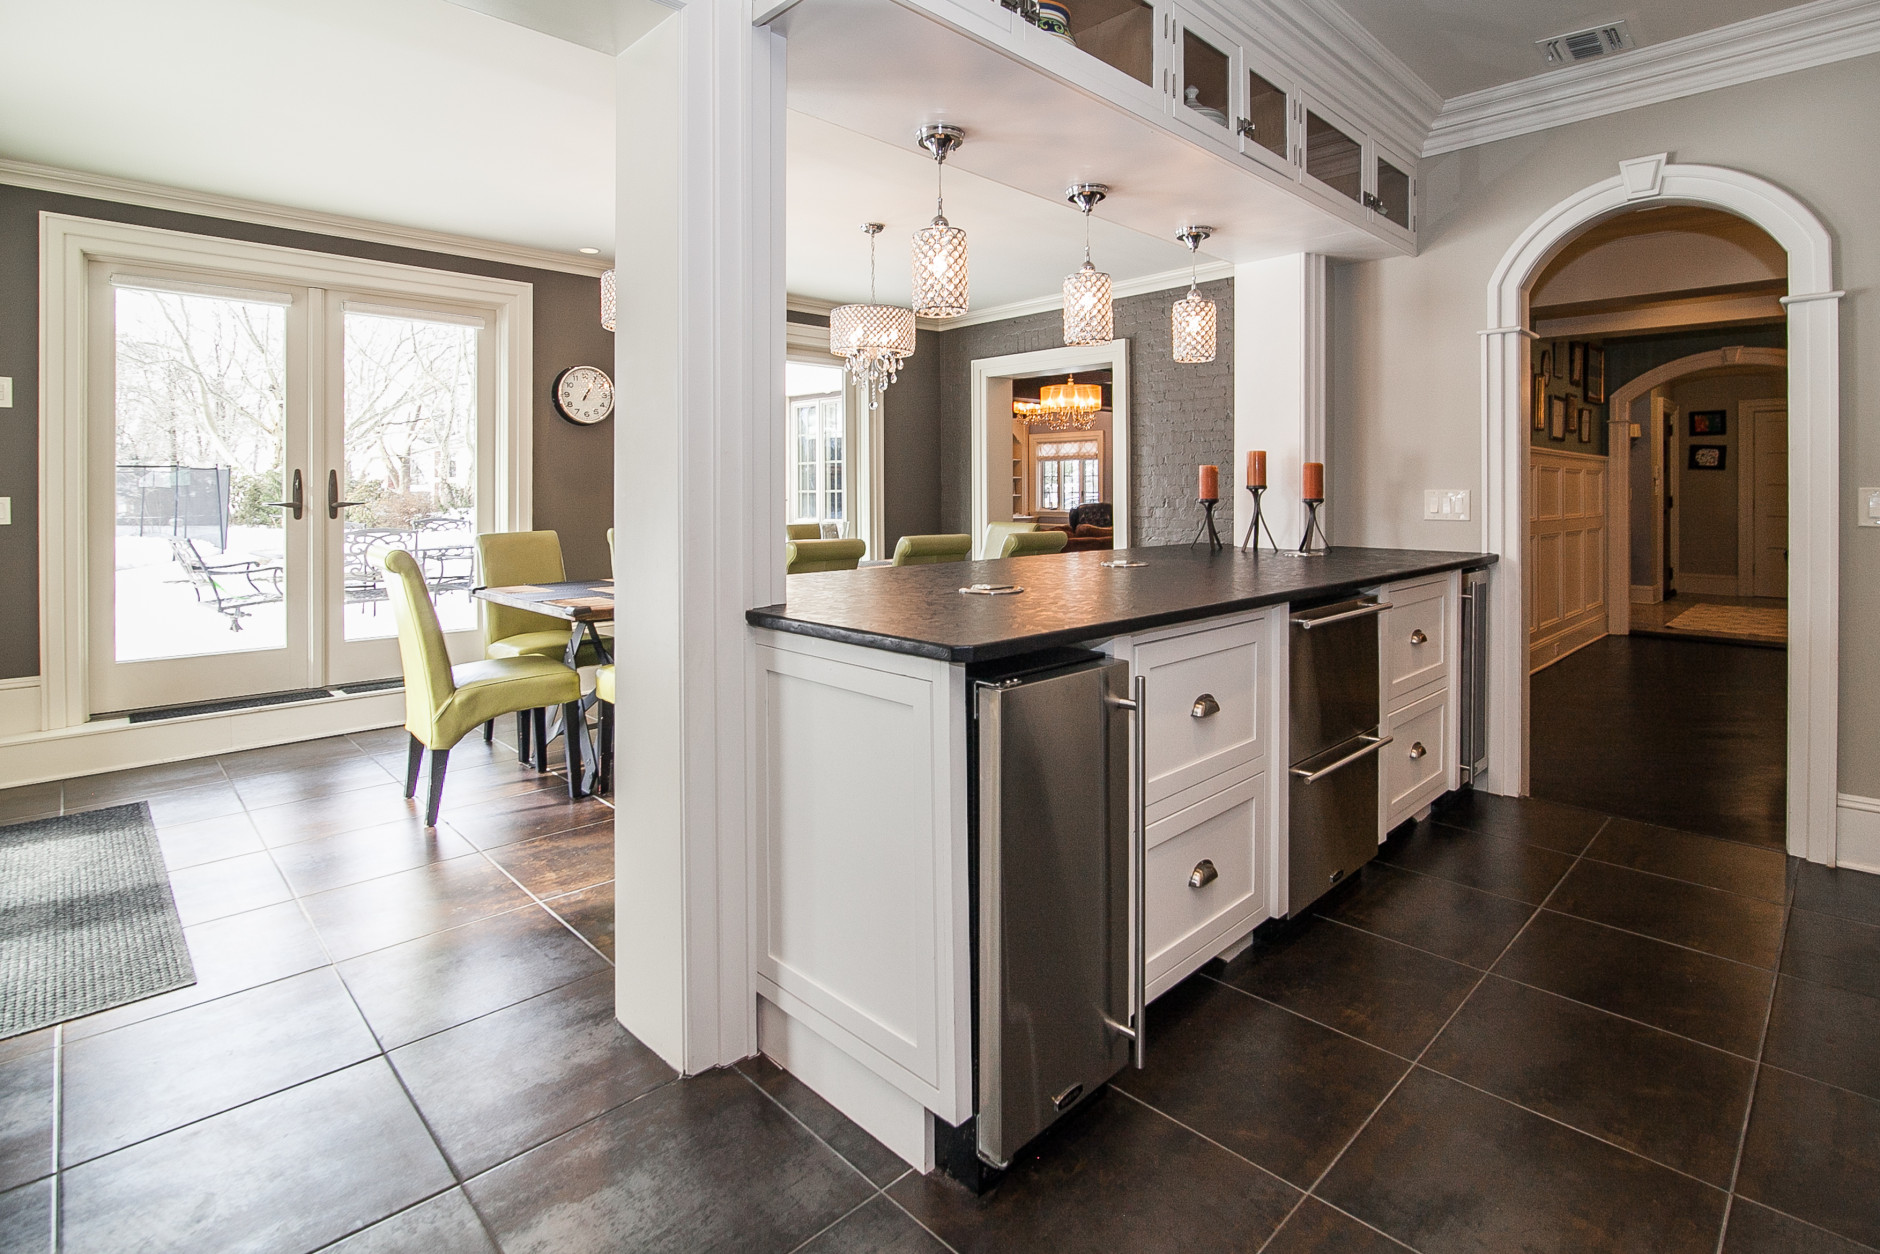 The house has a gourmet eat-in kitchen with a breakfast area. (Genelle Brown/TopTenRealEstate)